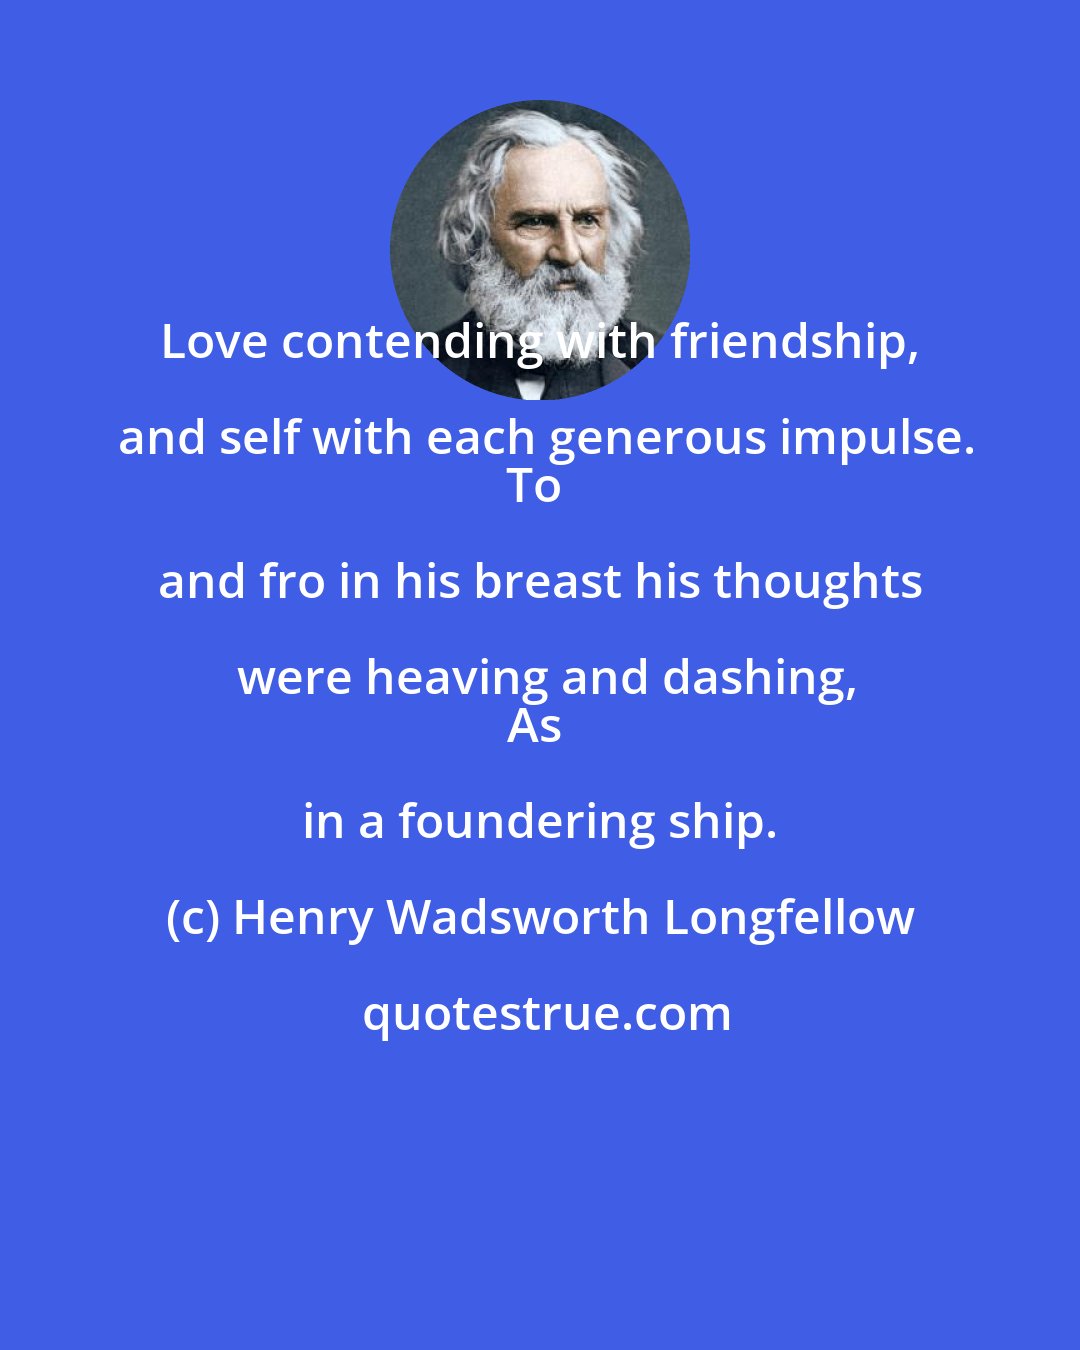 Henry Wadsworth Longfellow: Love contending with friendship, and self with each generous impulse.
To and fro in his breast his thoughts were heaving and dashing,
As in a foundering ship.